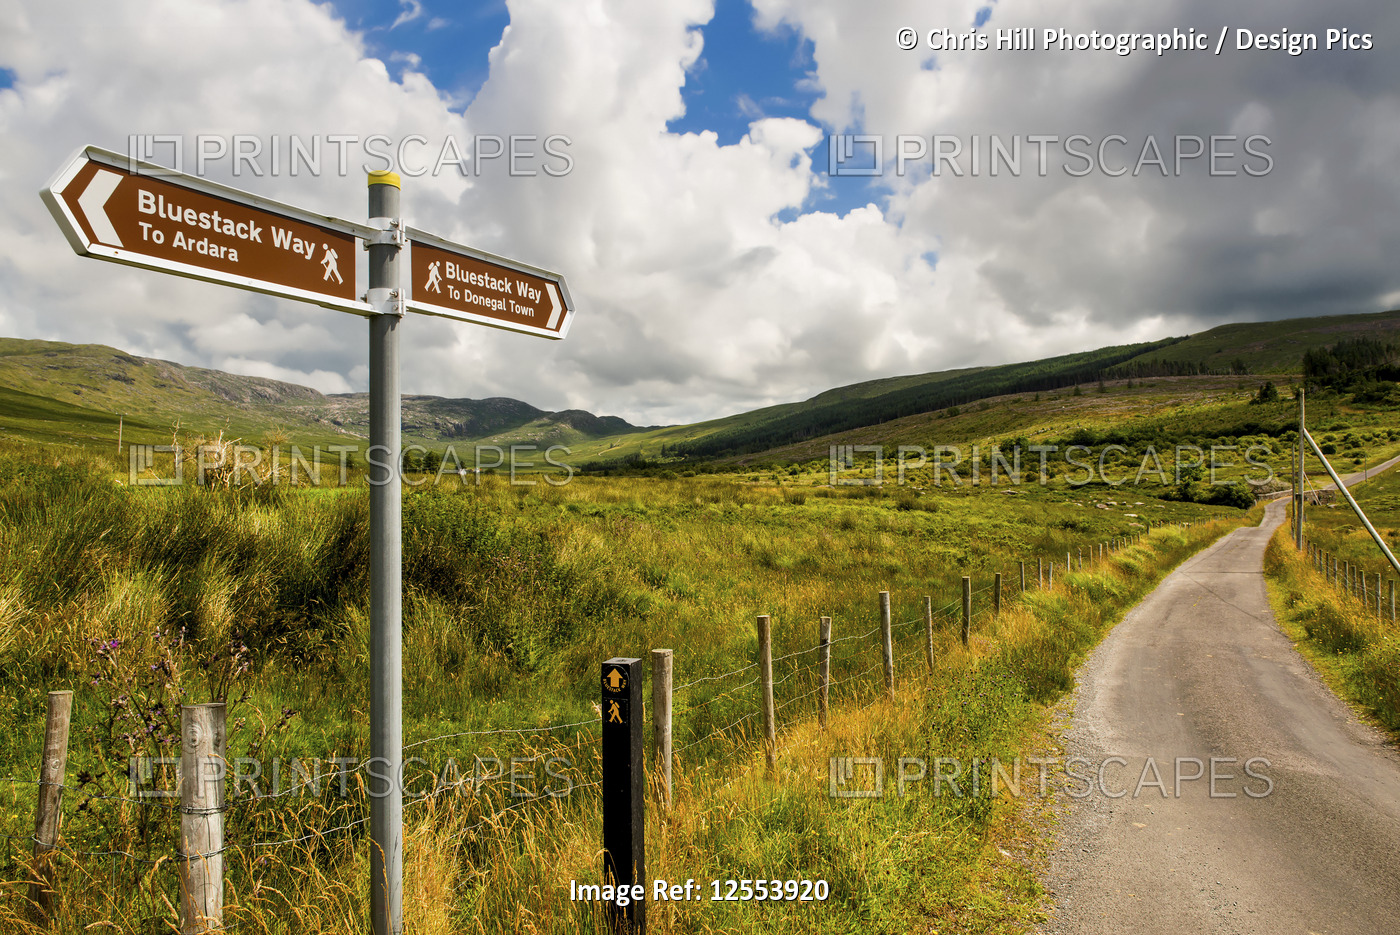 A sign for hiking trails, Bluestack Way, and a road leading through a hilly ...